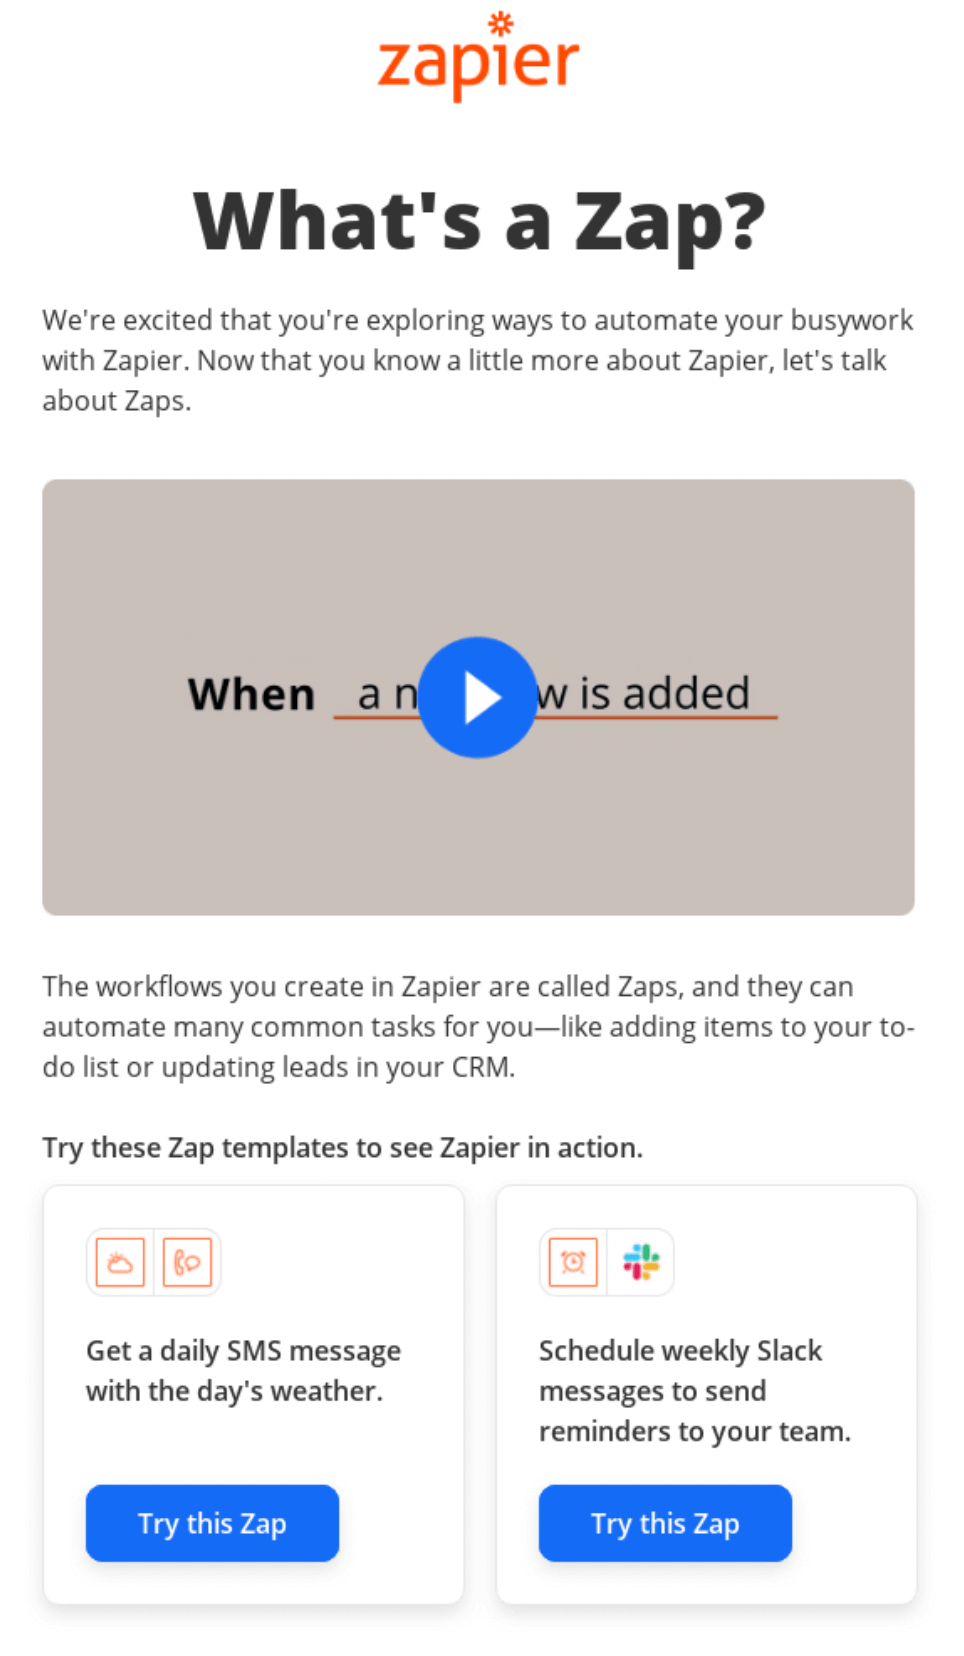 Example of a follow-up email from Zapier